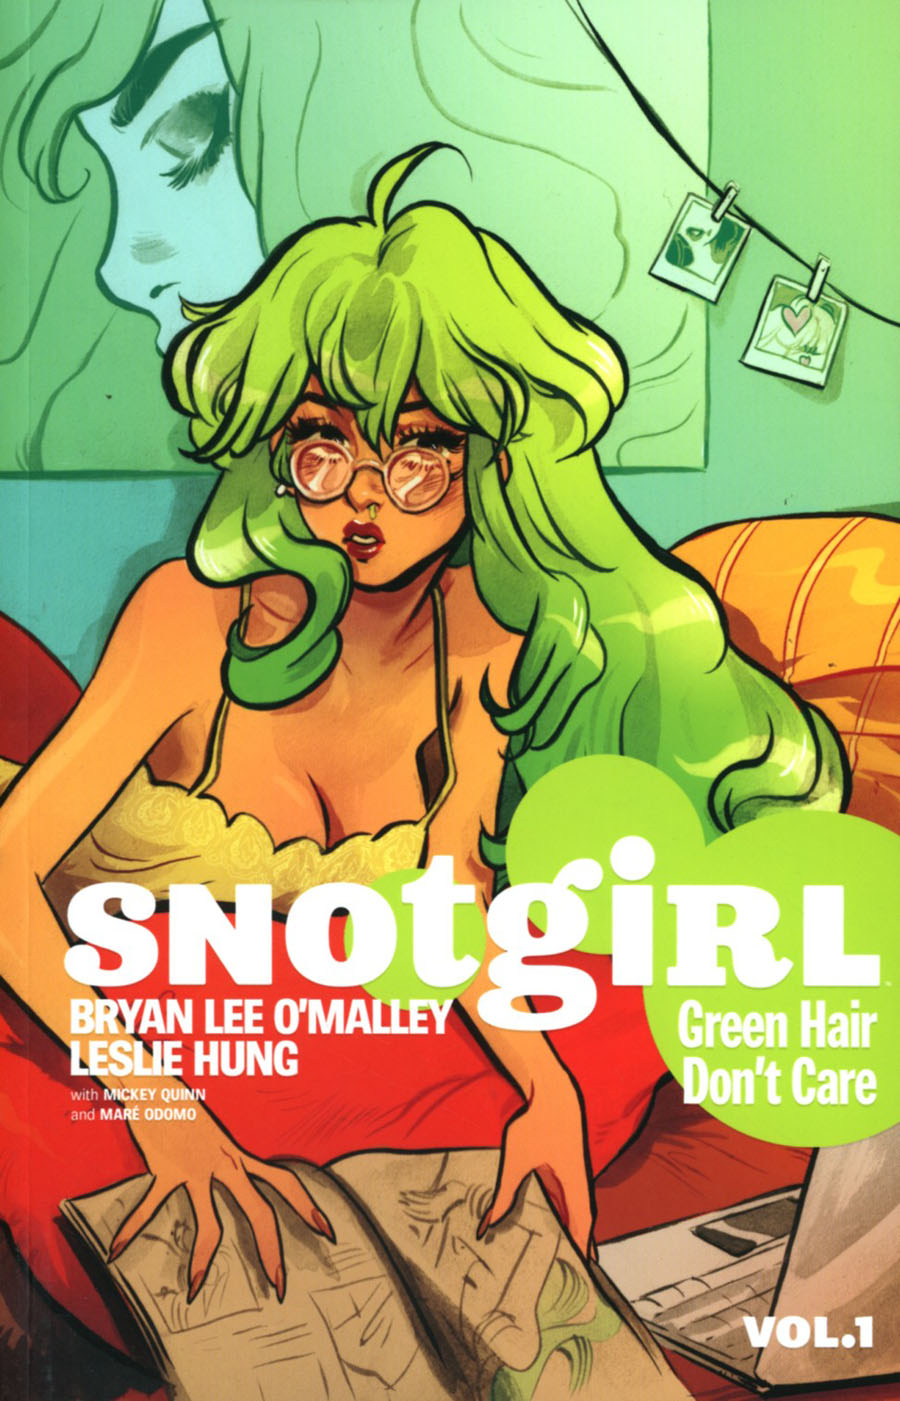 Snotgirl Vol 1 Green Hair Dont Care TP